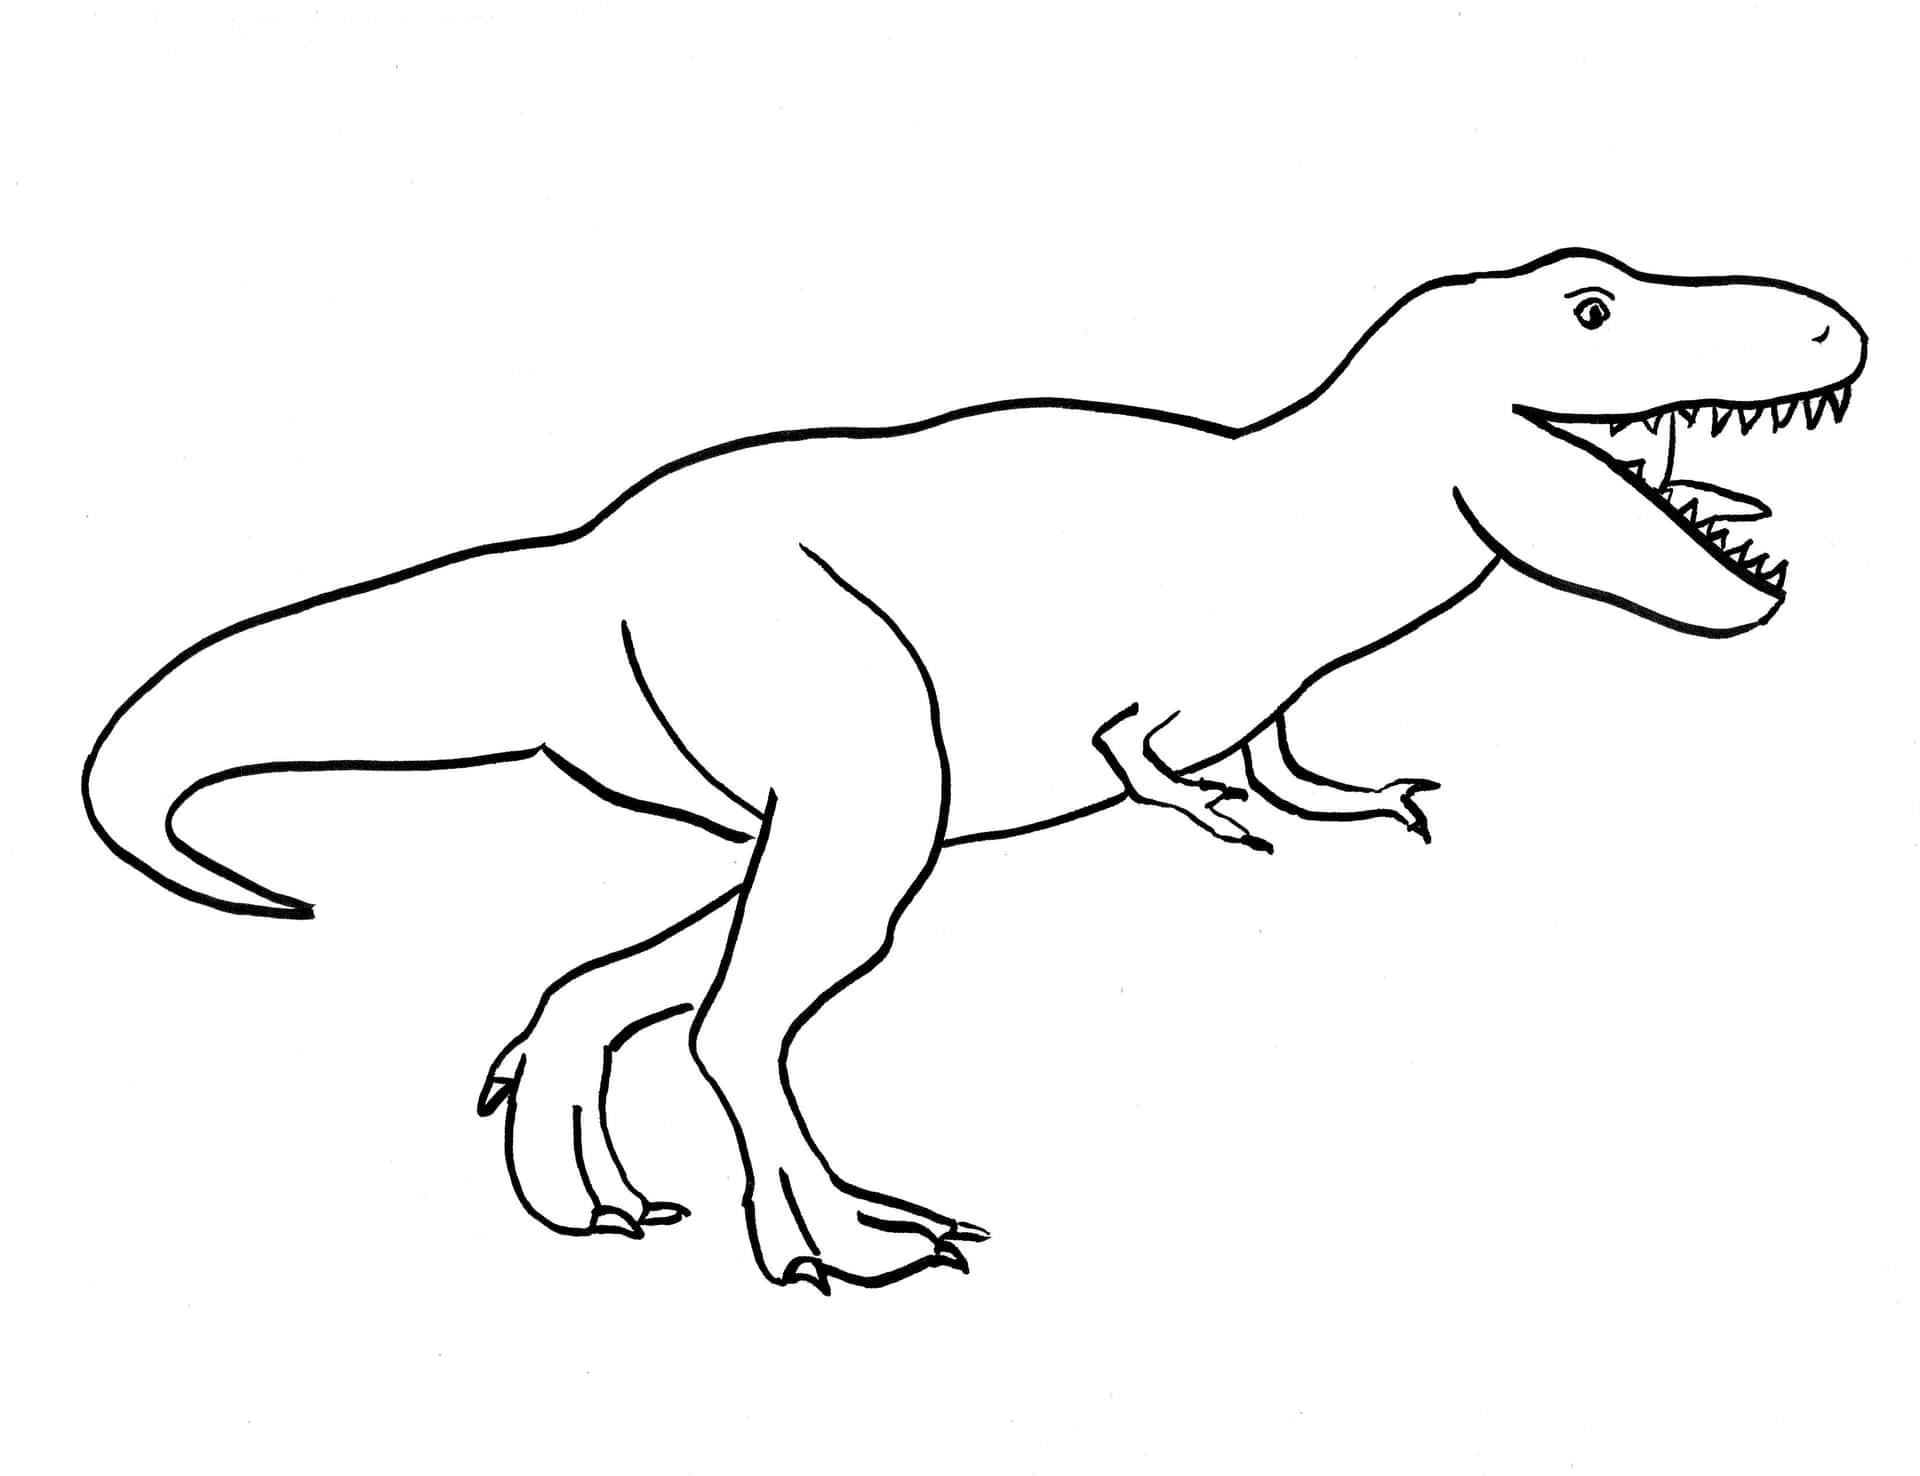 A Detailed Drawing of a Dinosaur